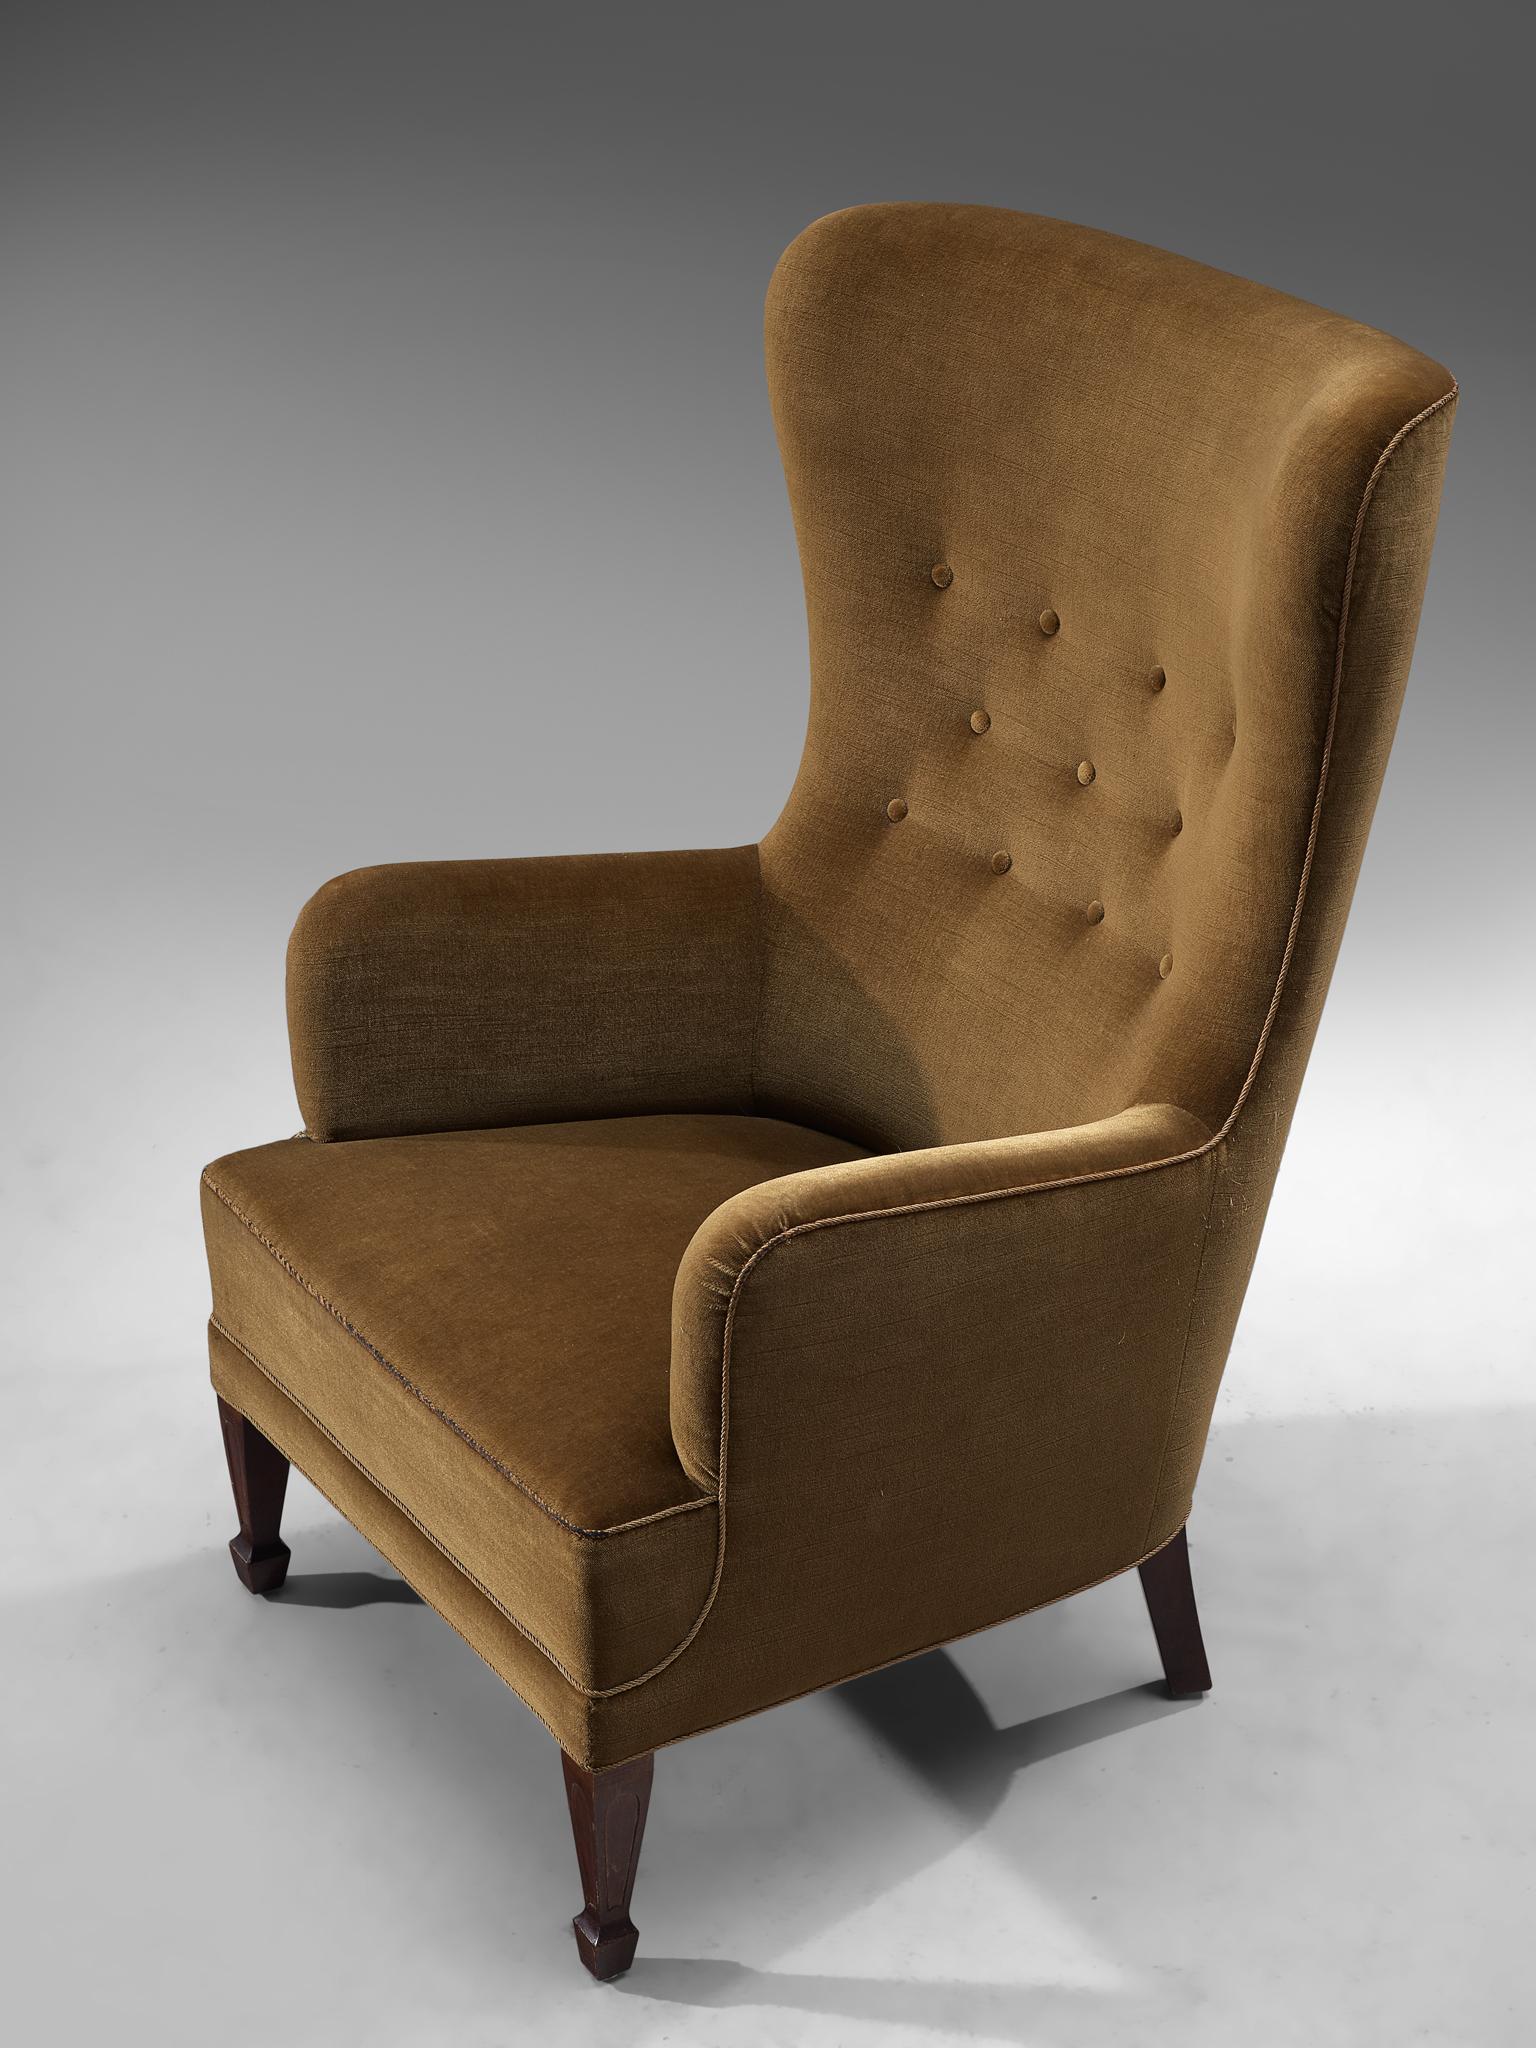 Fabric High Back Lounge Chair by Frits Henningsen, Denmark, 1930s